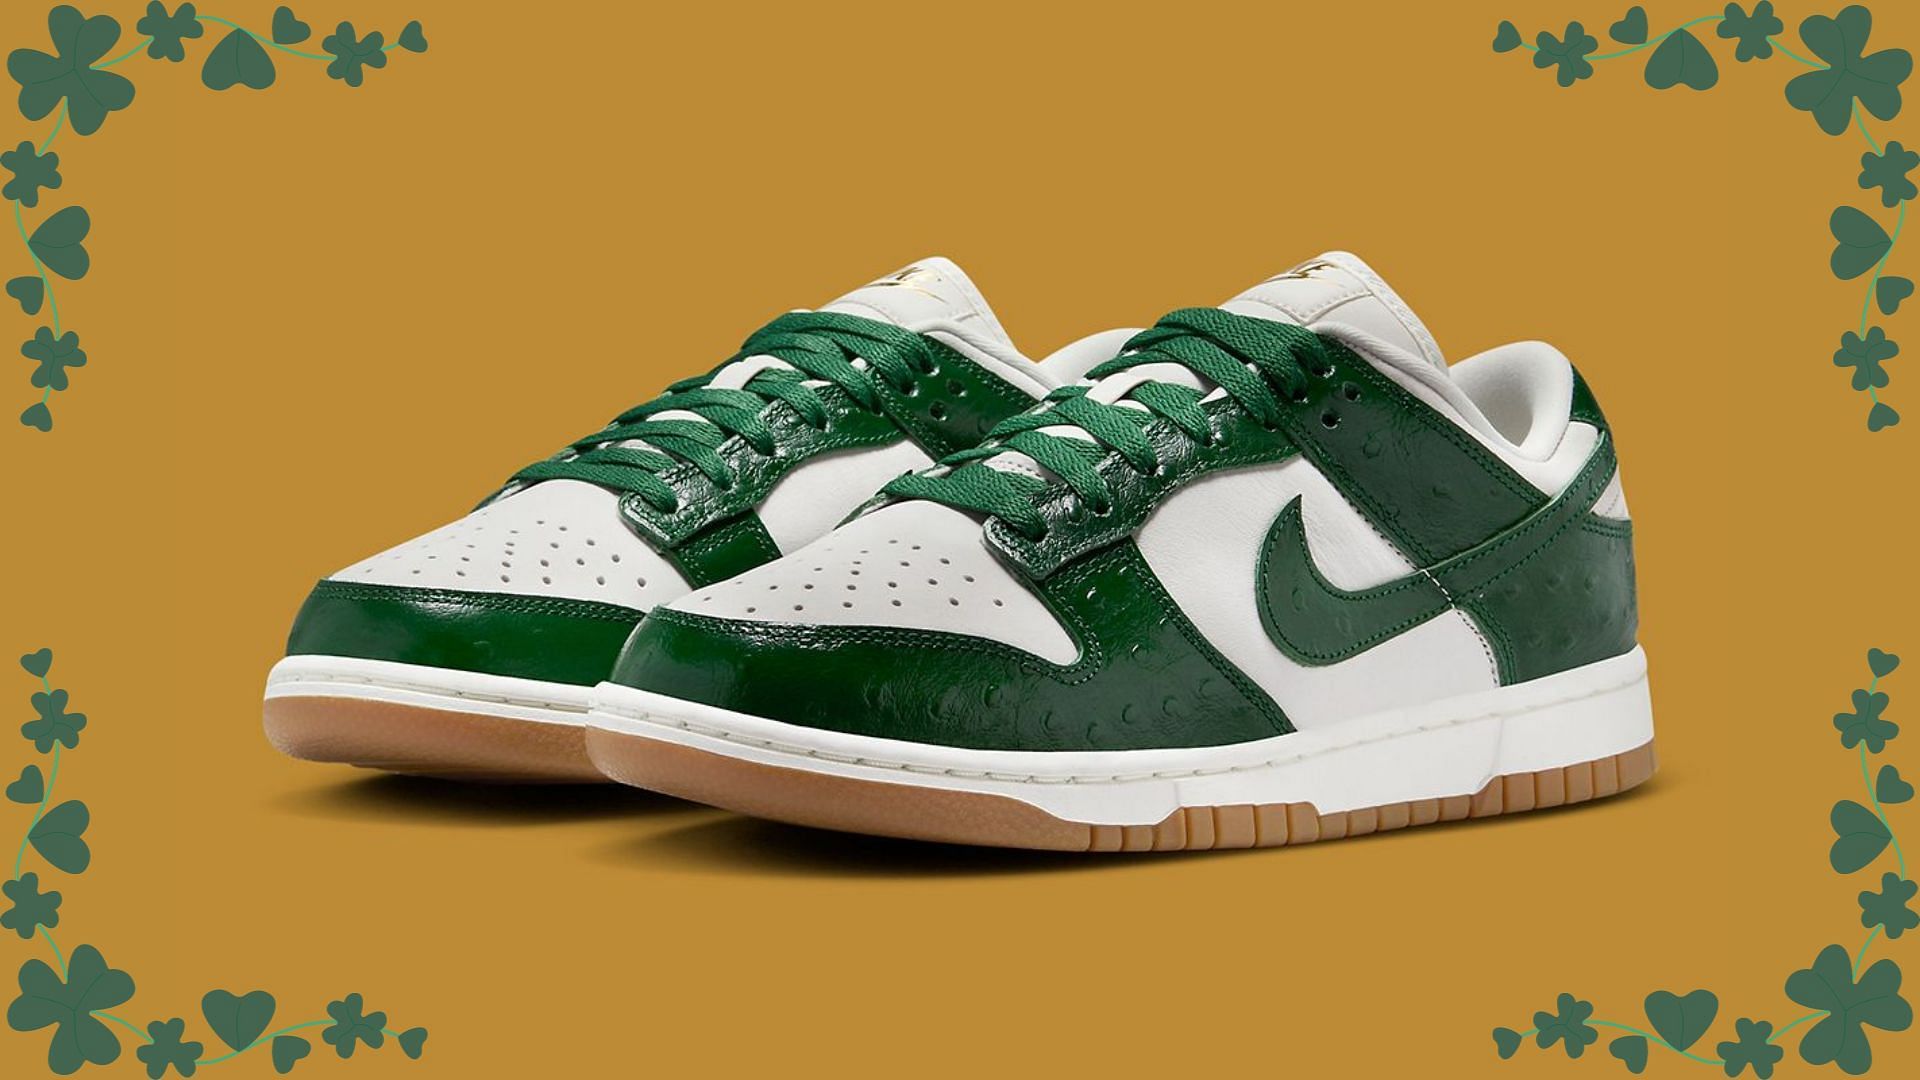 Nike Dunk Low LX Green Ostrich shoes (Image via Nike)